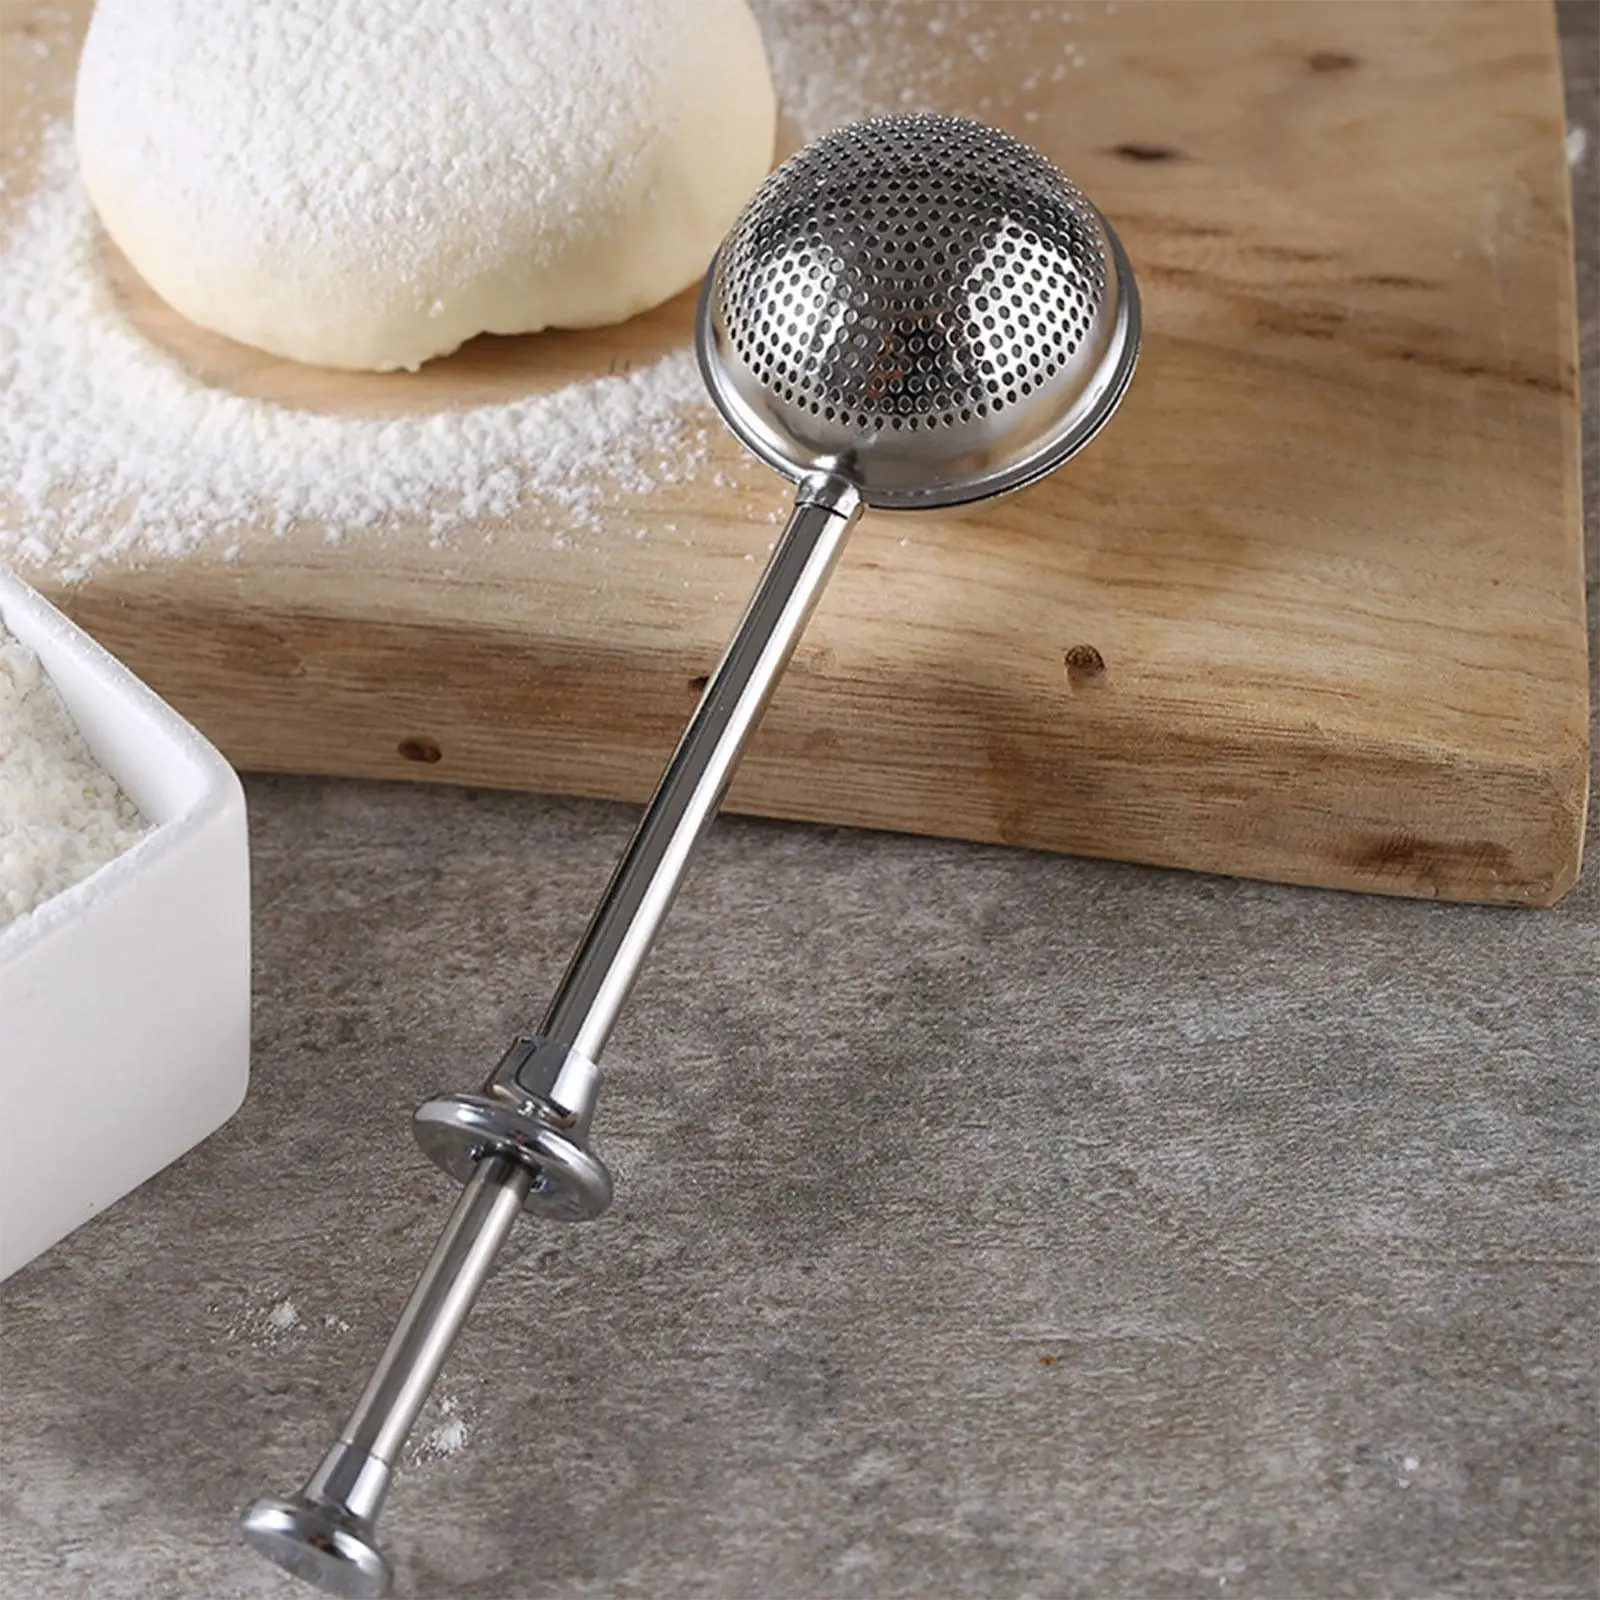 Stainless Steel Powder Shaker Telescopic Flour Sieve for Coffee Cocoa Powder Pepper Spice